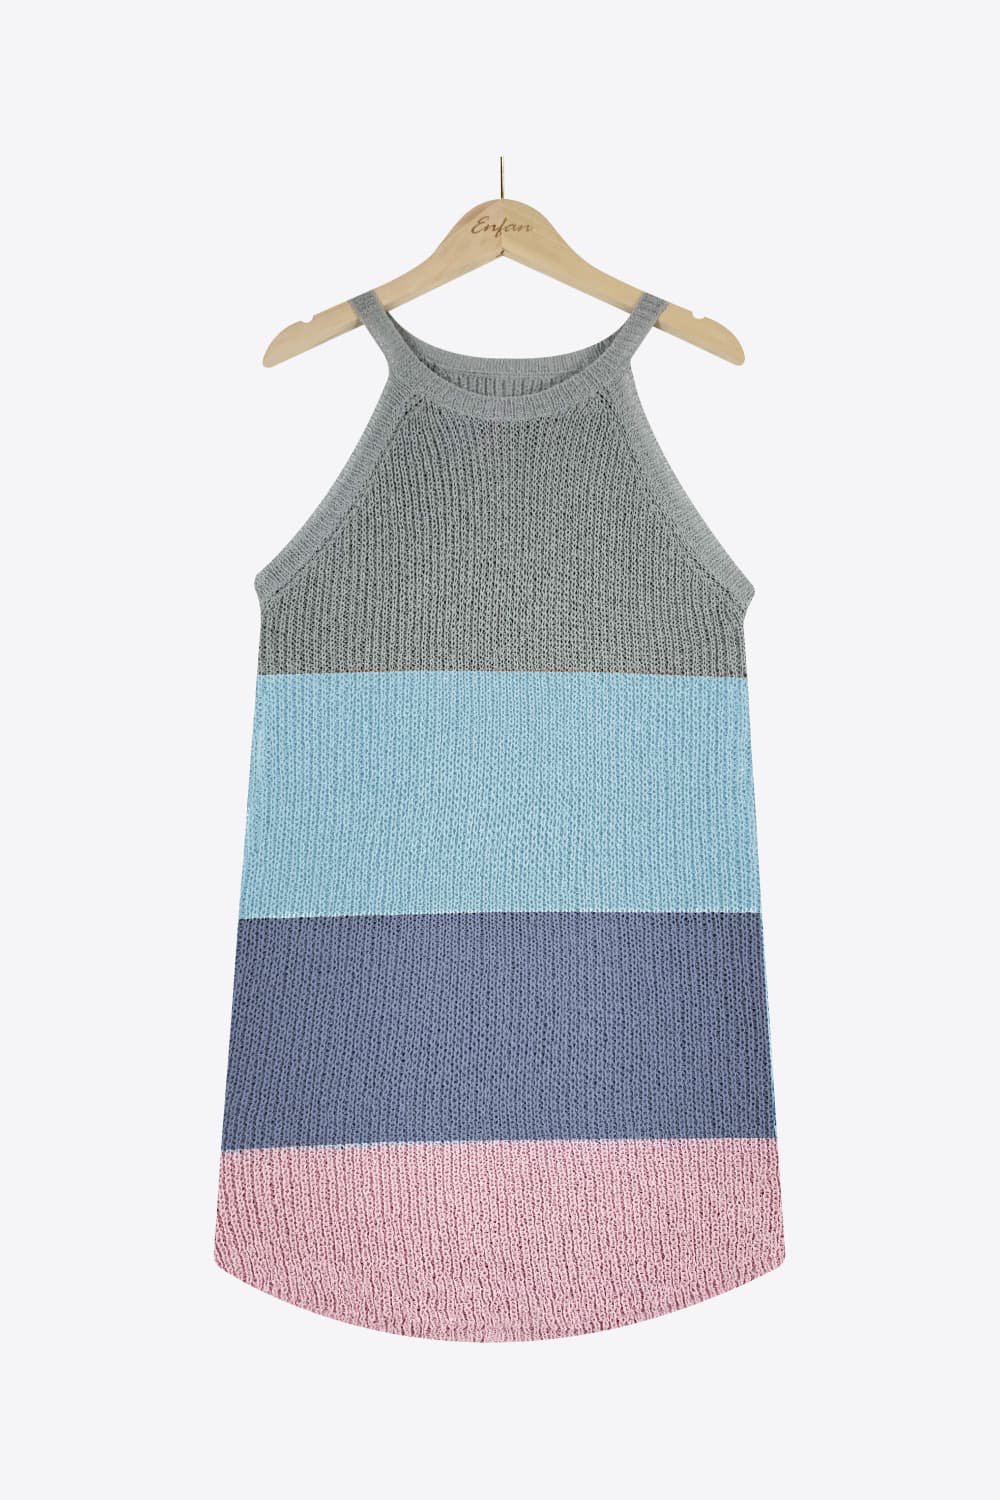 Color Block Round Neck Sleeveless Knit Top 🦋